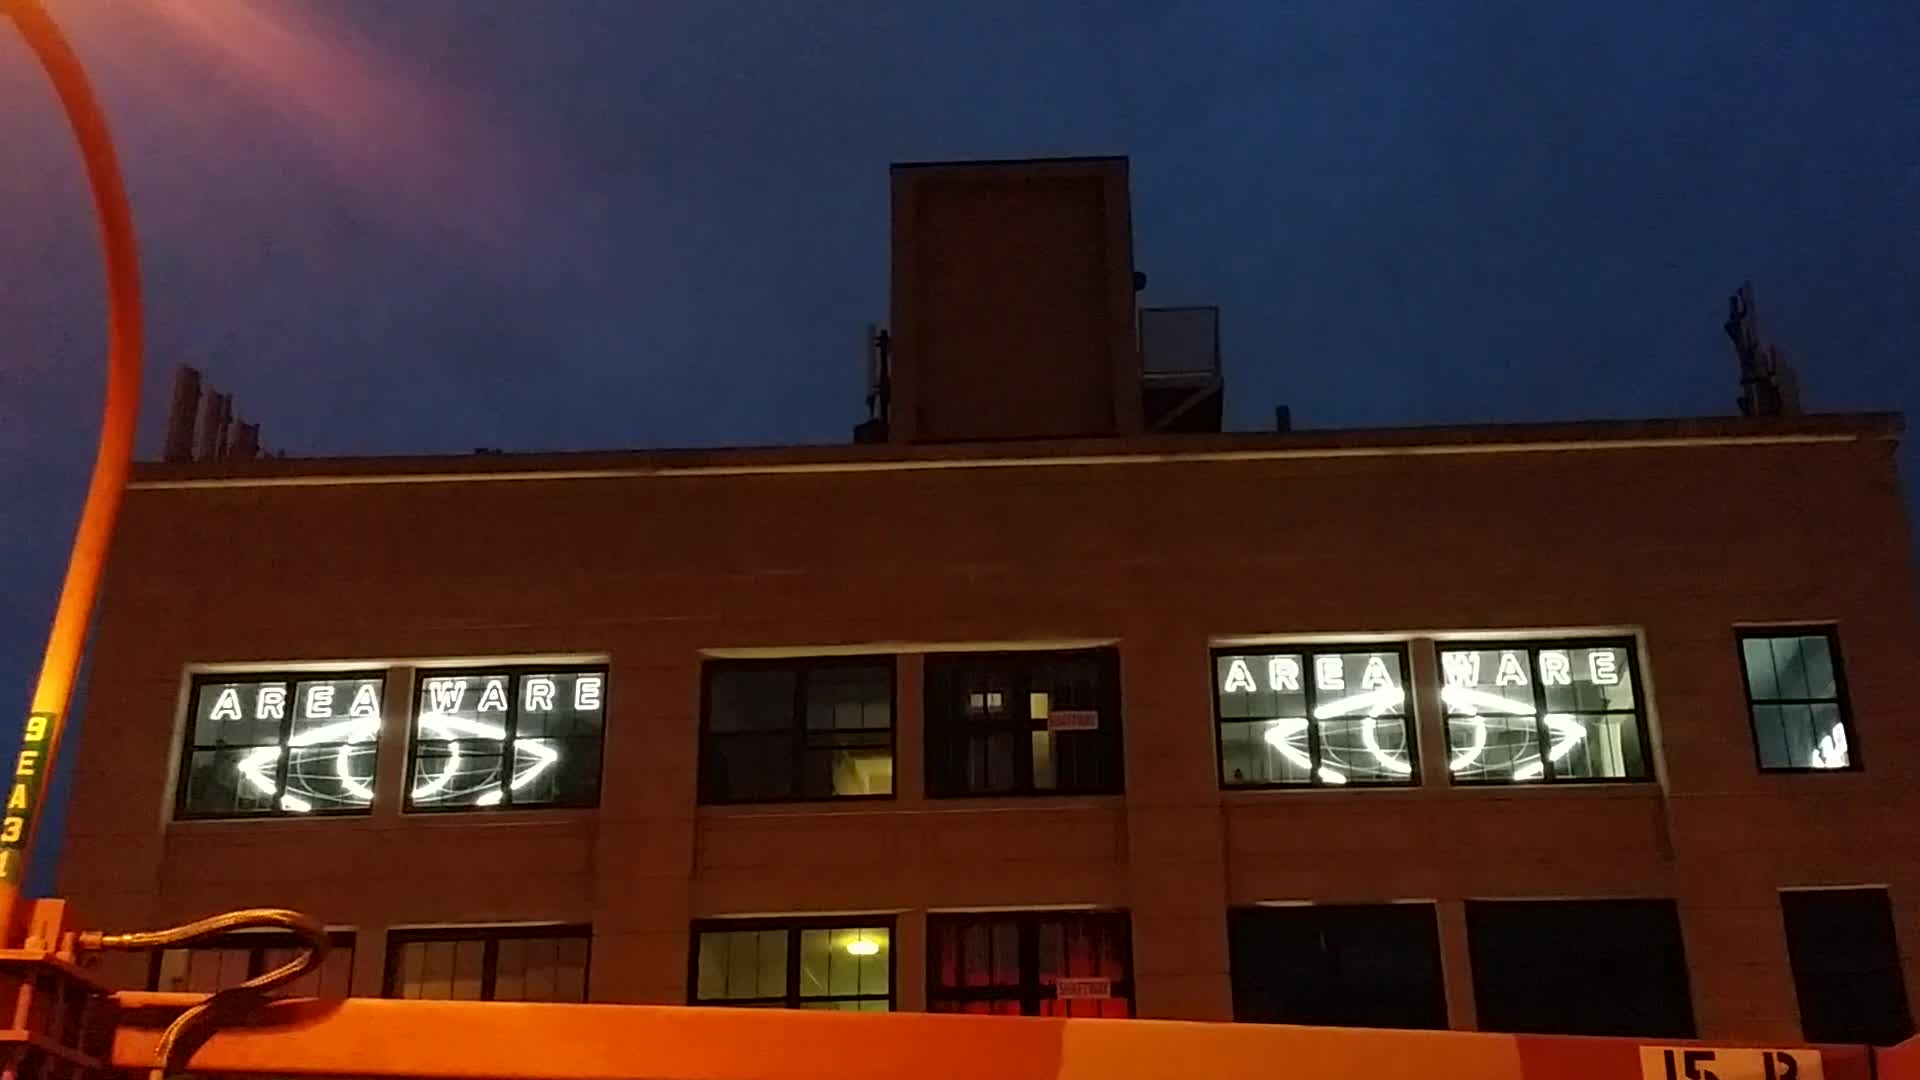 Areaware's neon eyes as seen from street level in Williamsburg, NY